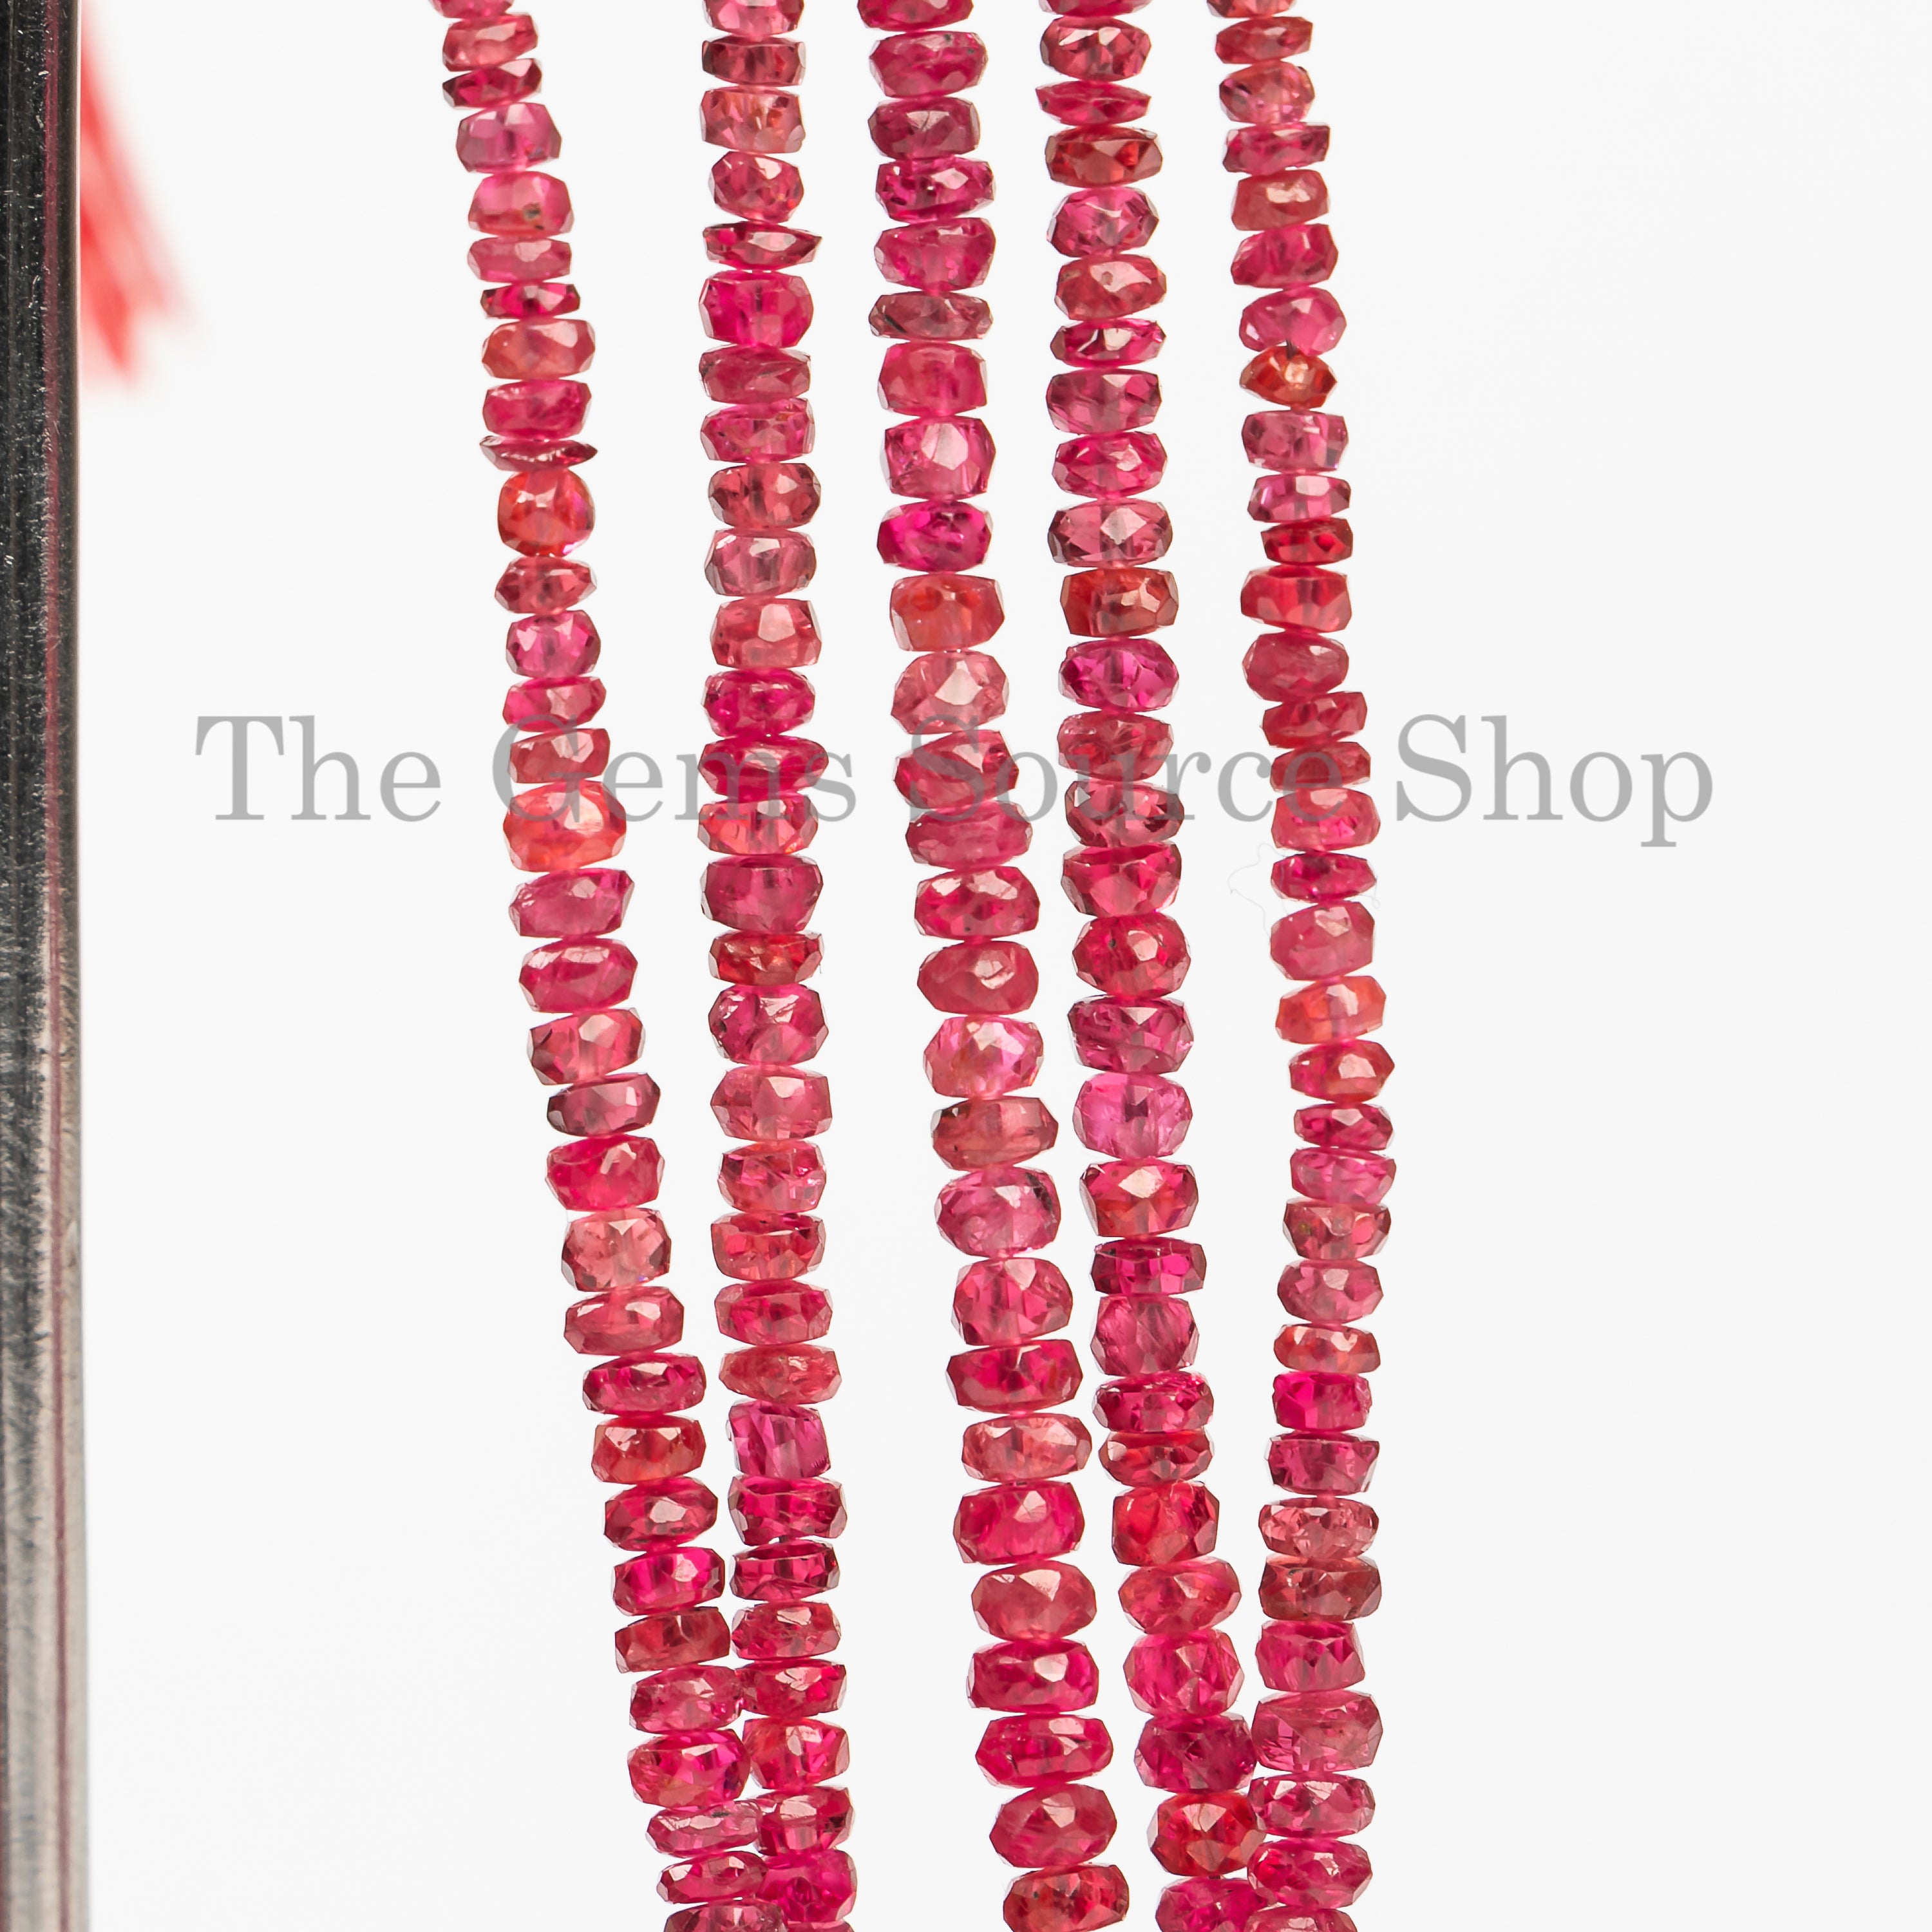 Rare Red Spinel Beads, Spinel Rondelle Beads, Spinel Faceted Beads, Spinel Gemstone Beads